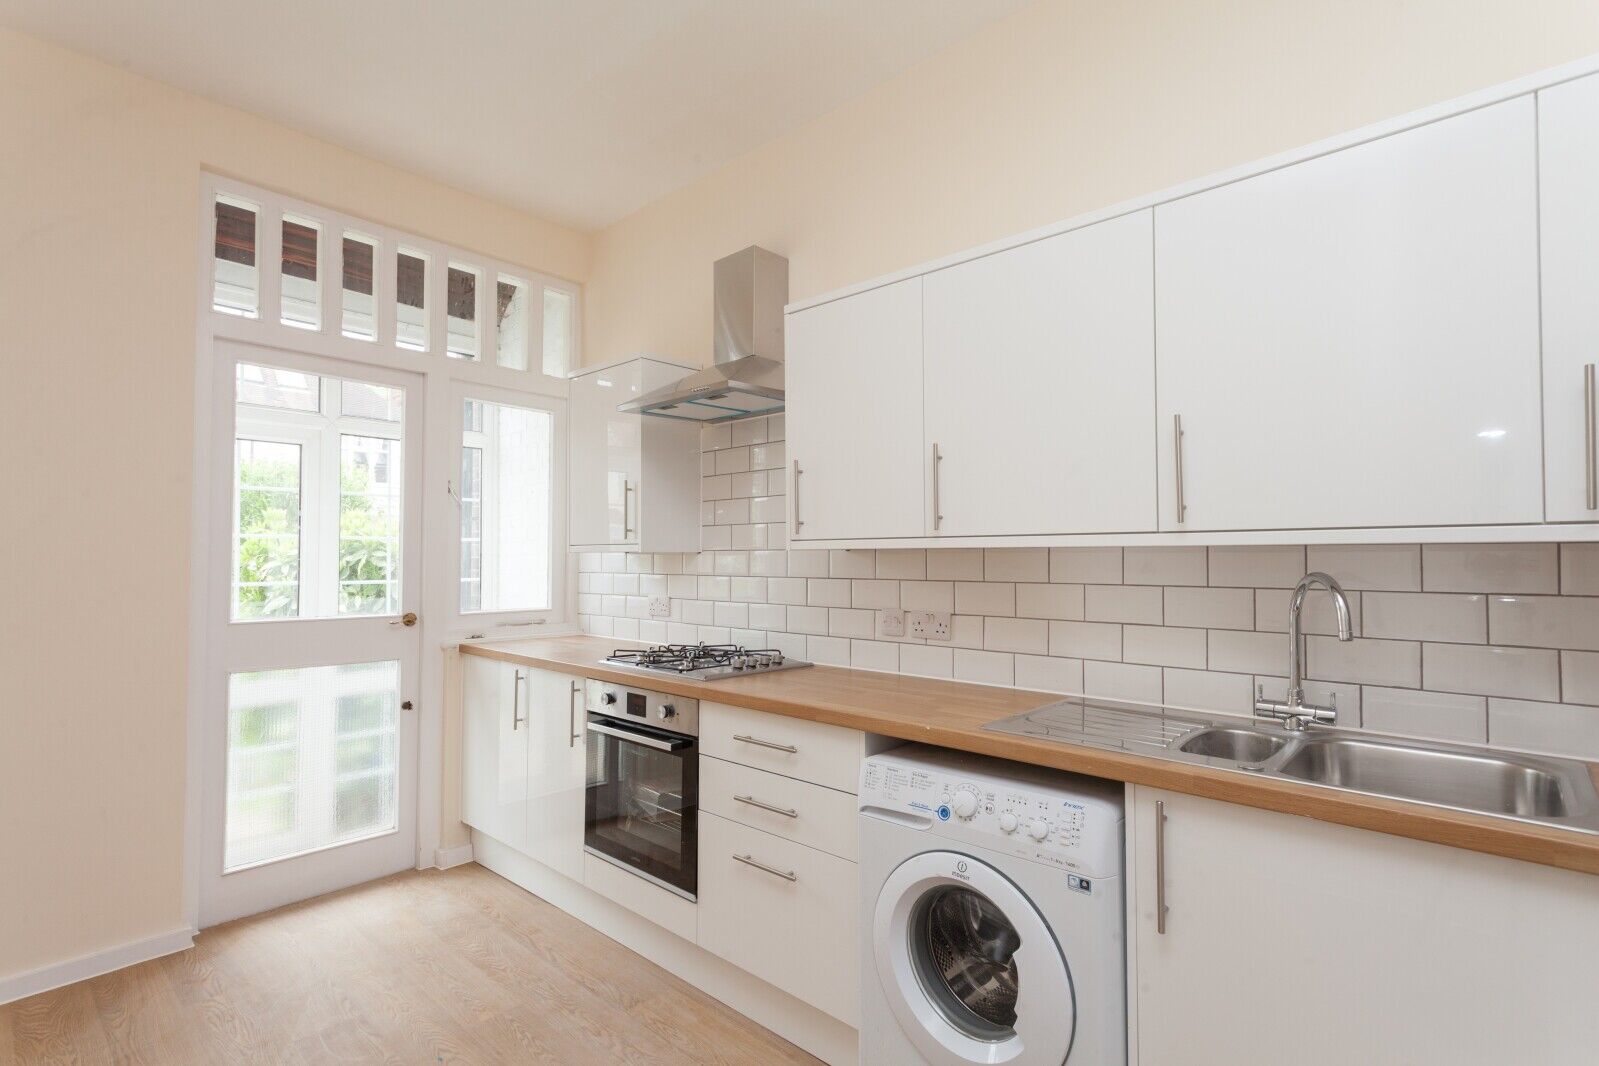 3 bedroom  house to rent, Available now Laurel Road, West Wimbledon, SW20, main image